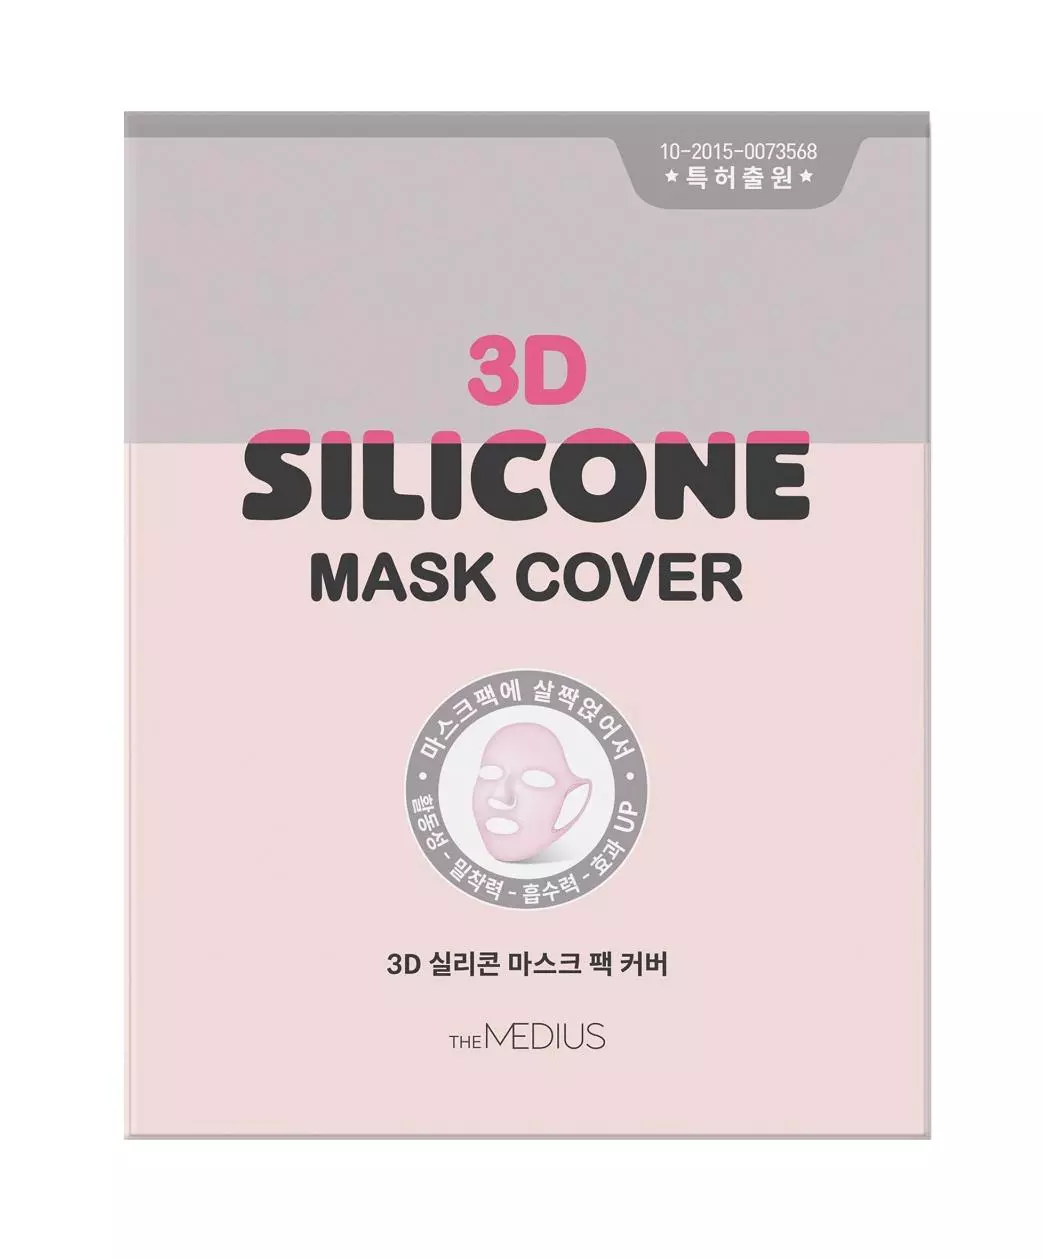 3D Silicone Mask Cover в интернет-магазине Skinly